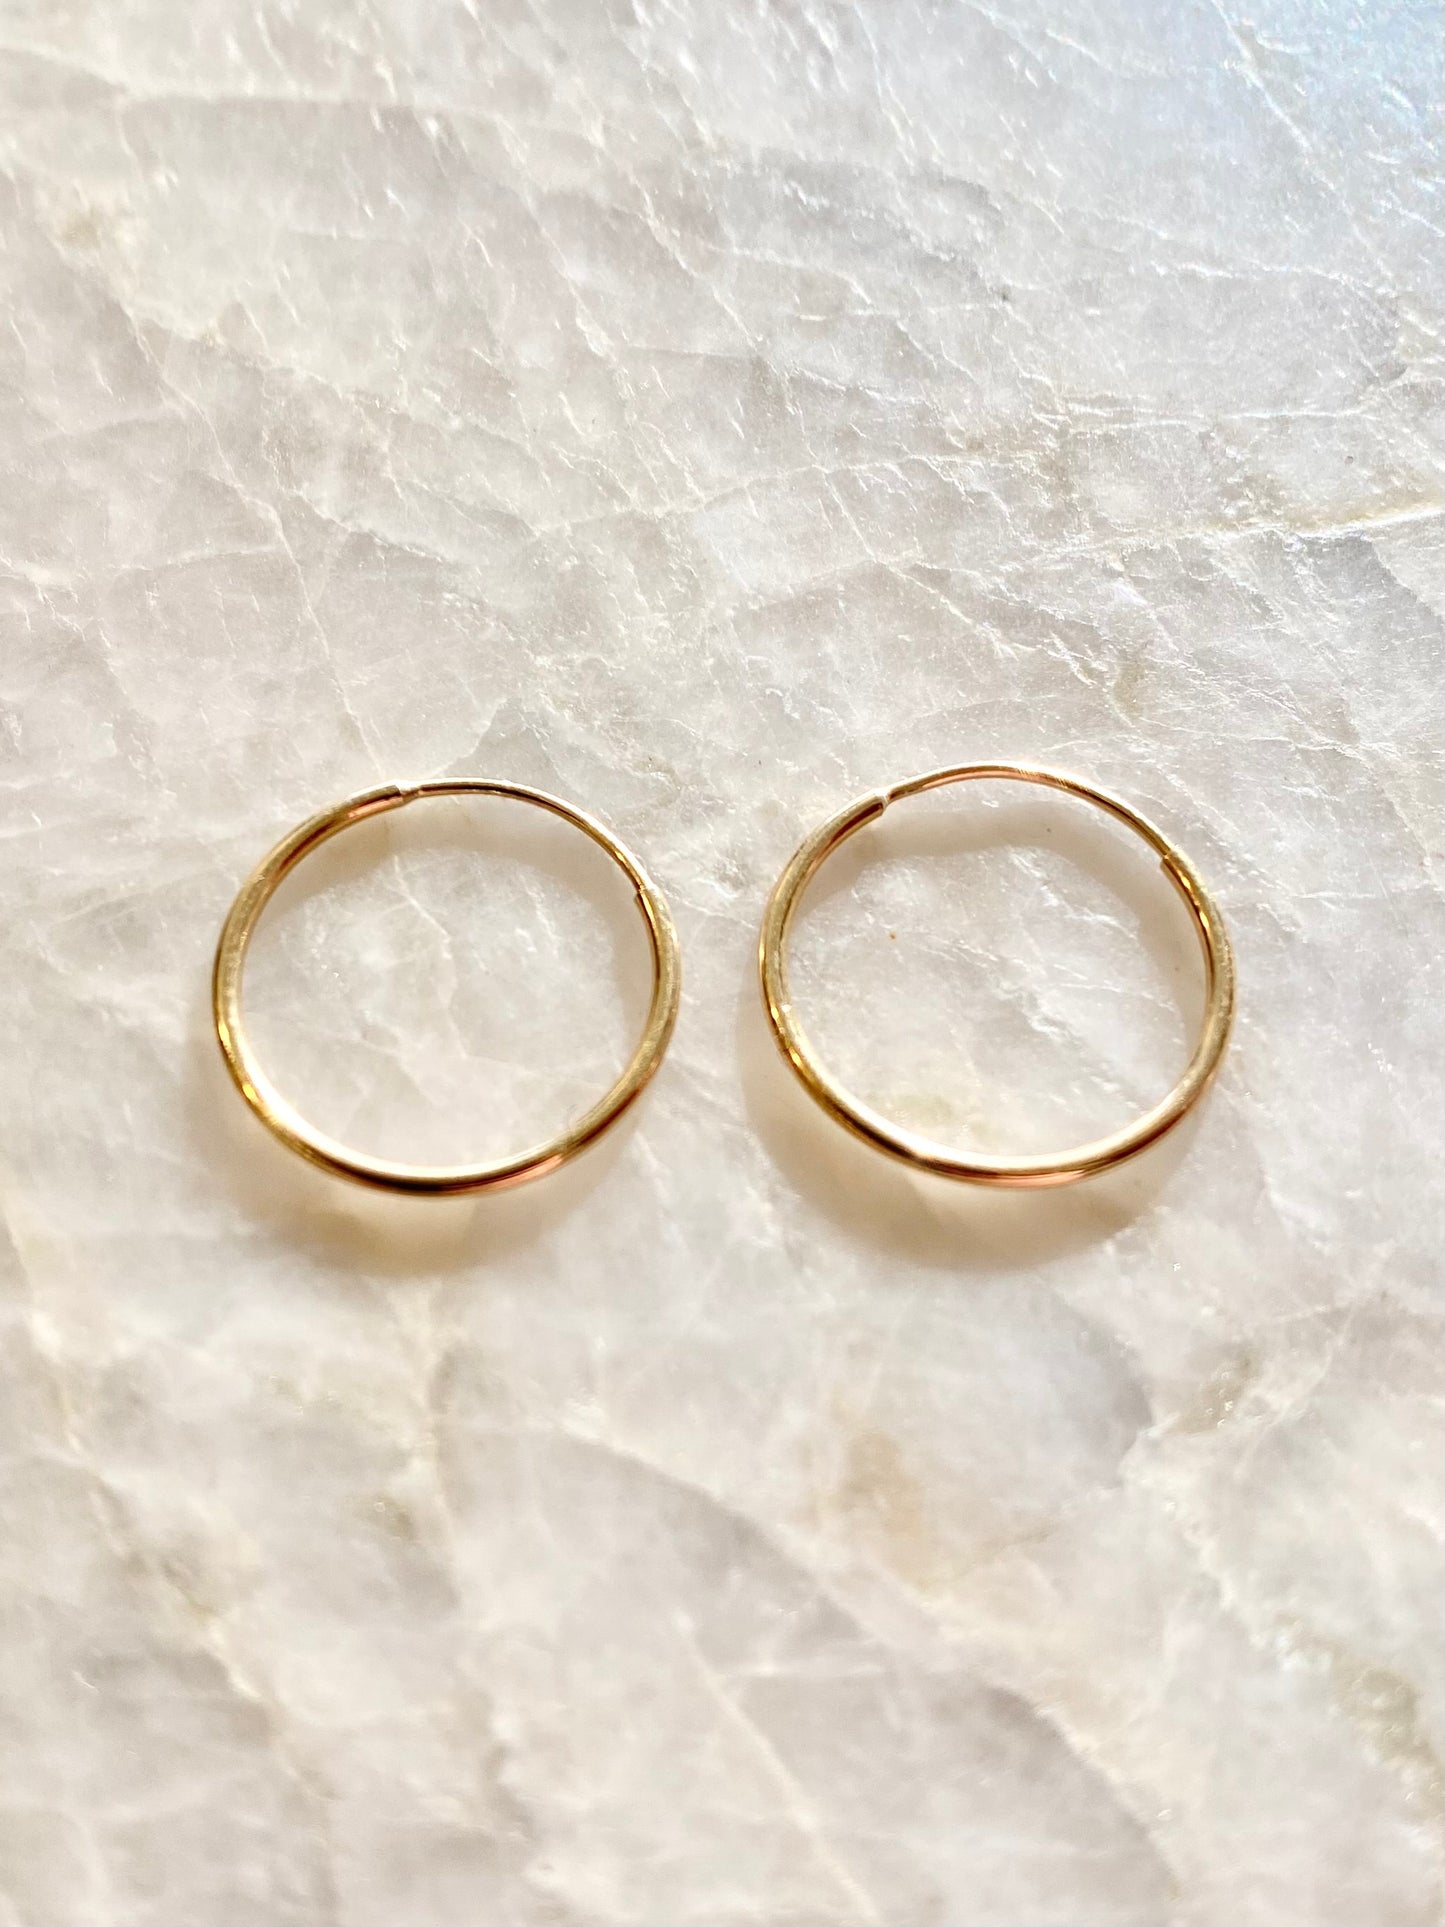 Dunia Jewelry | 14k Solid Gold Endless Hoops